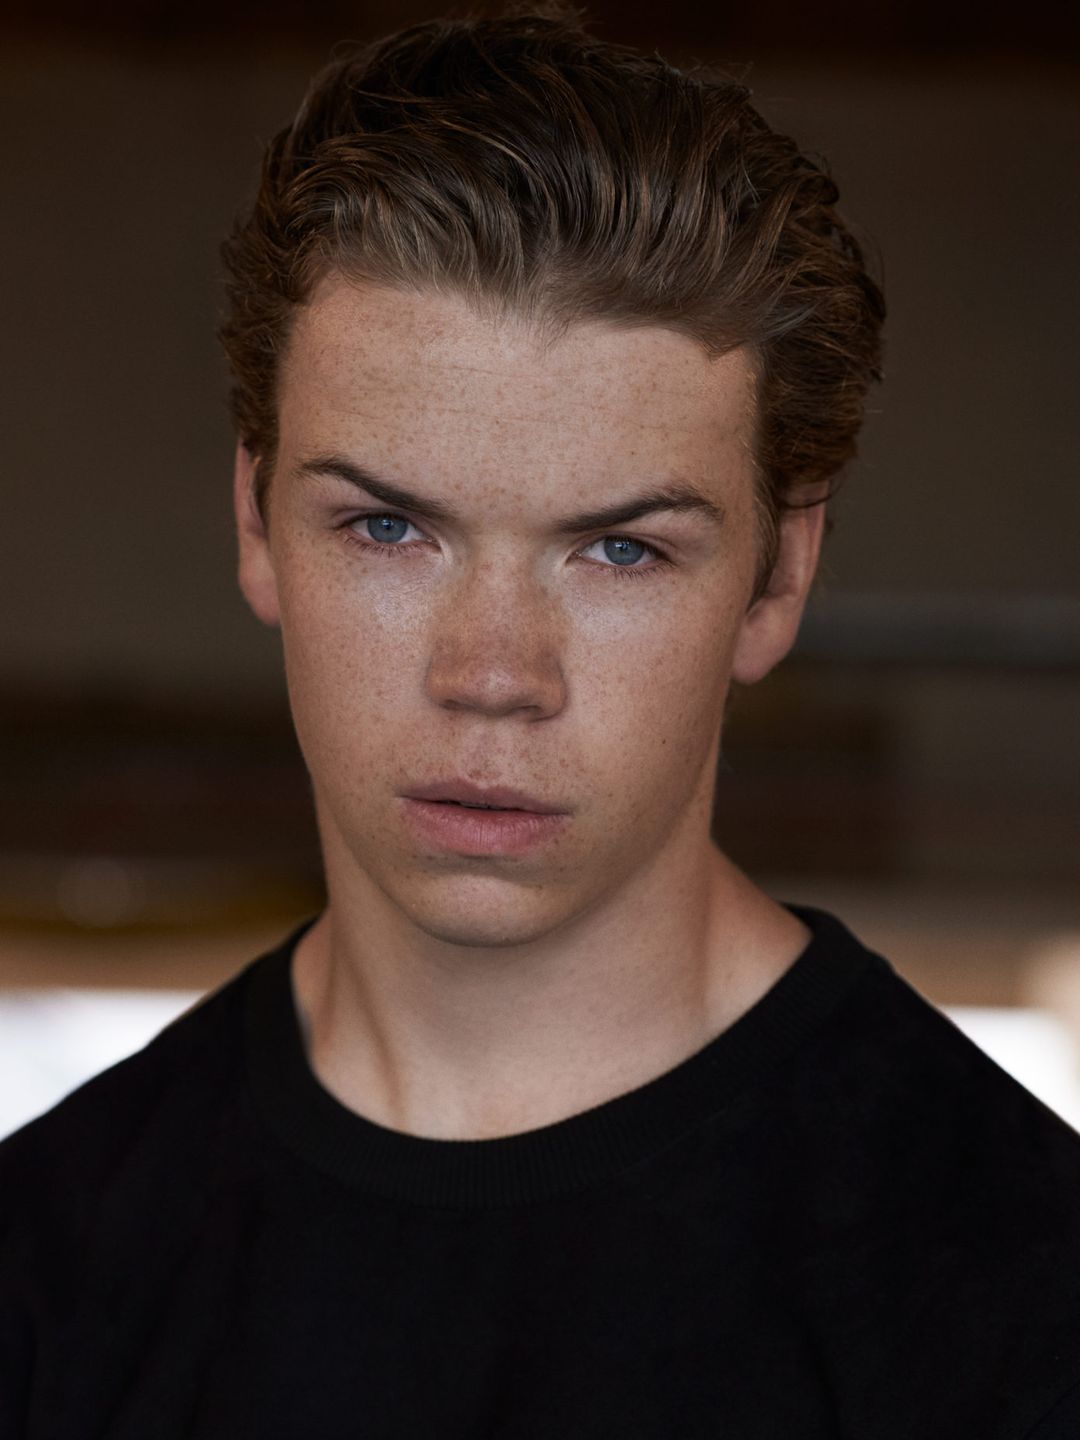 Will Poulter young pics